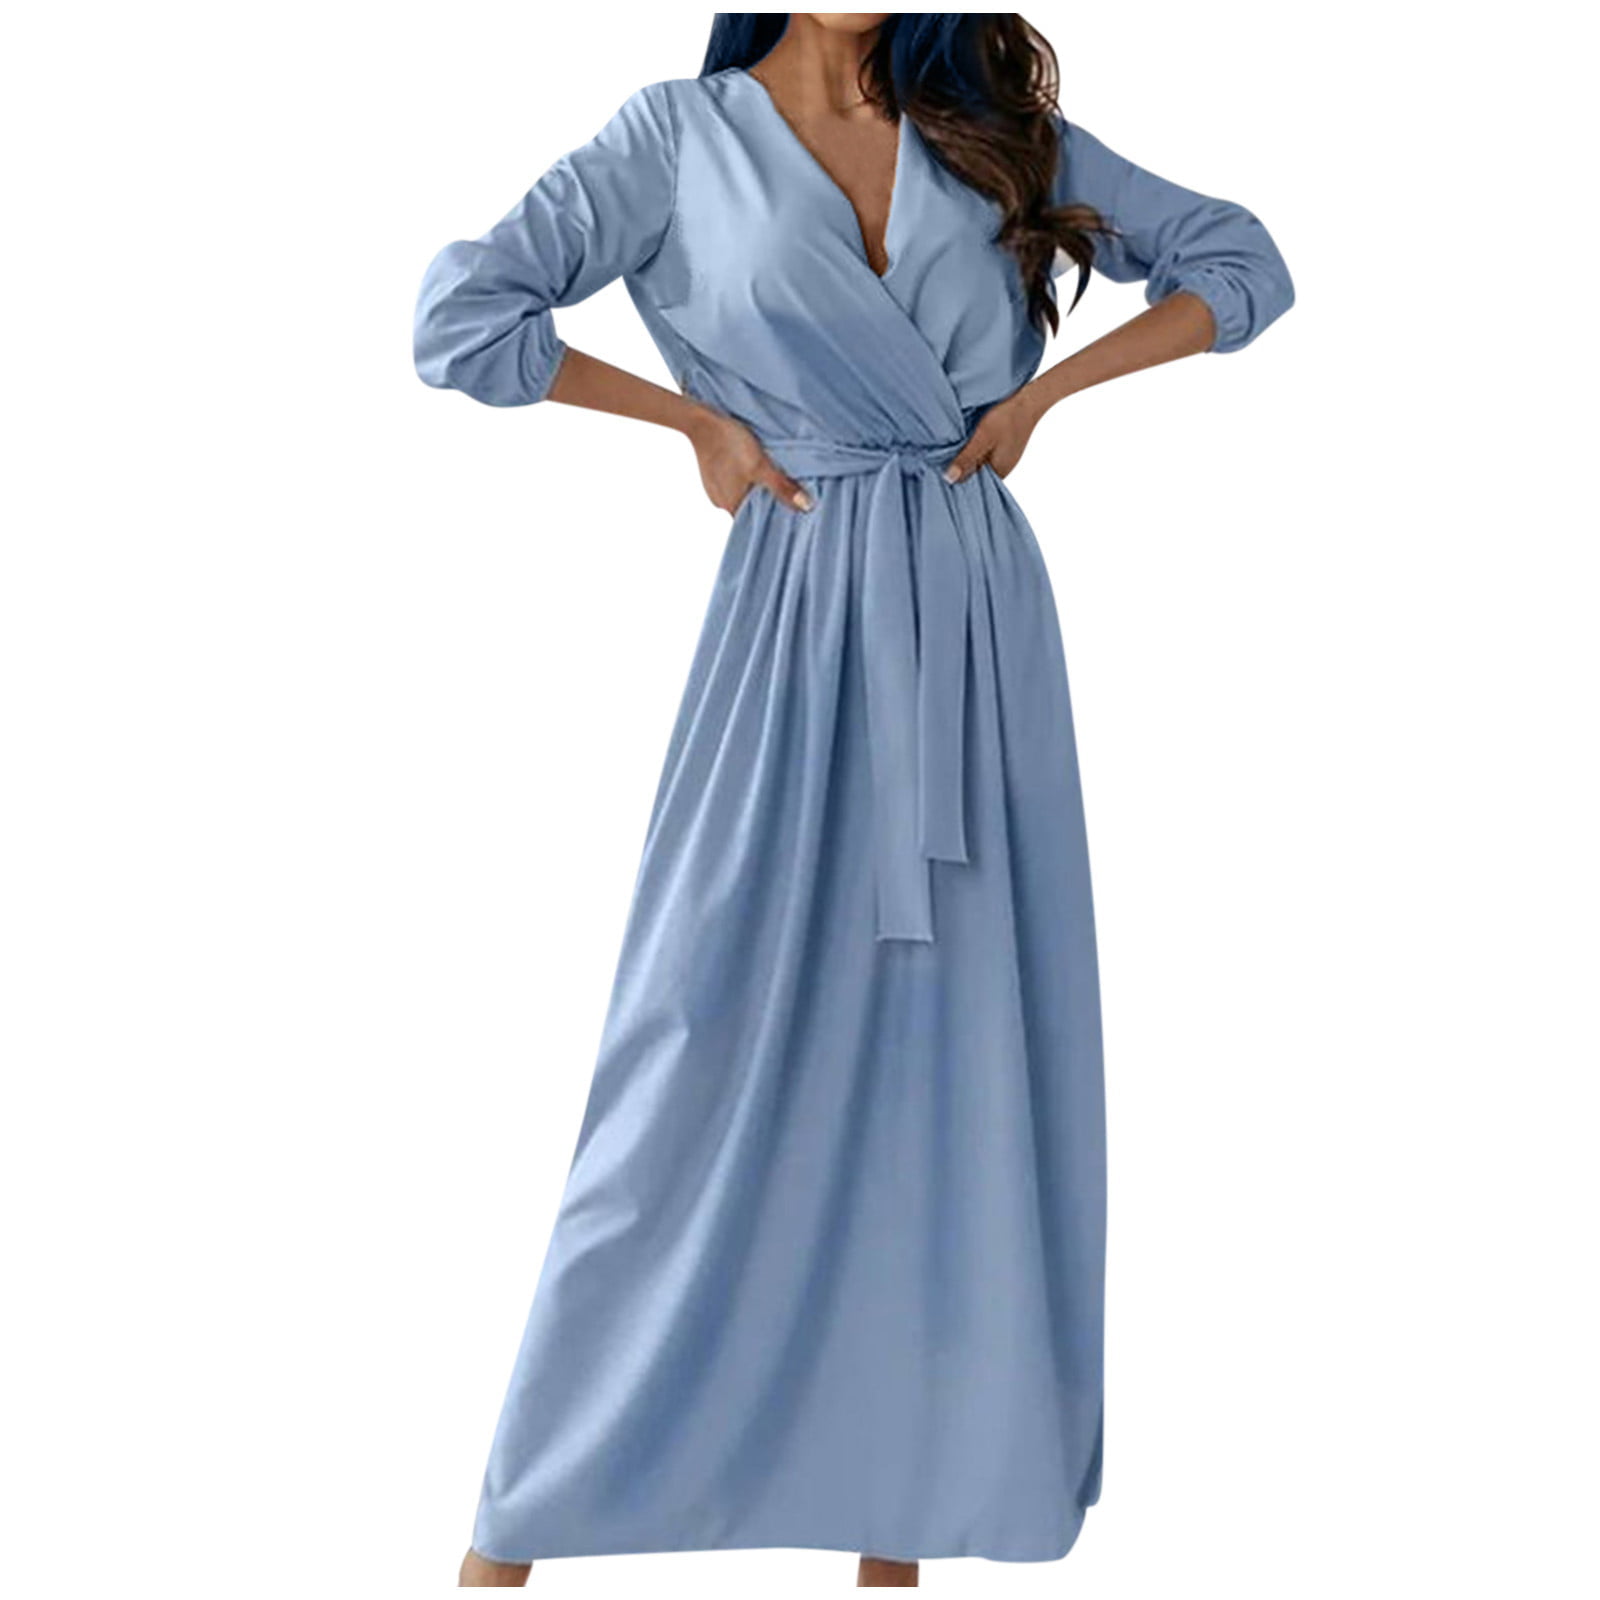 vbnergoie Womens Holiday O Neck Solid Dress Ladies Long Sleeves Party Beach  Dress Blue Midi Dress Womens Dresses Casual Spring